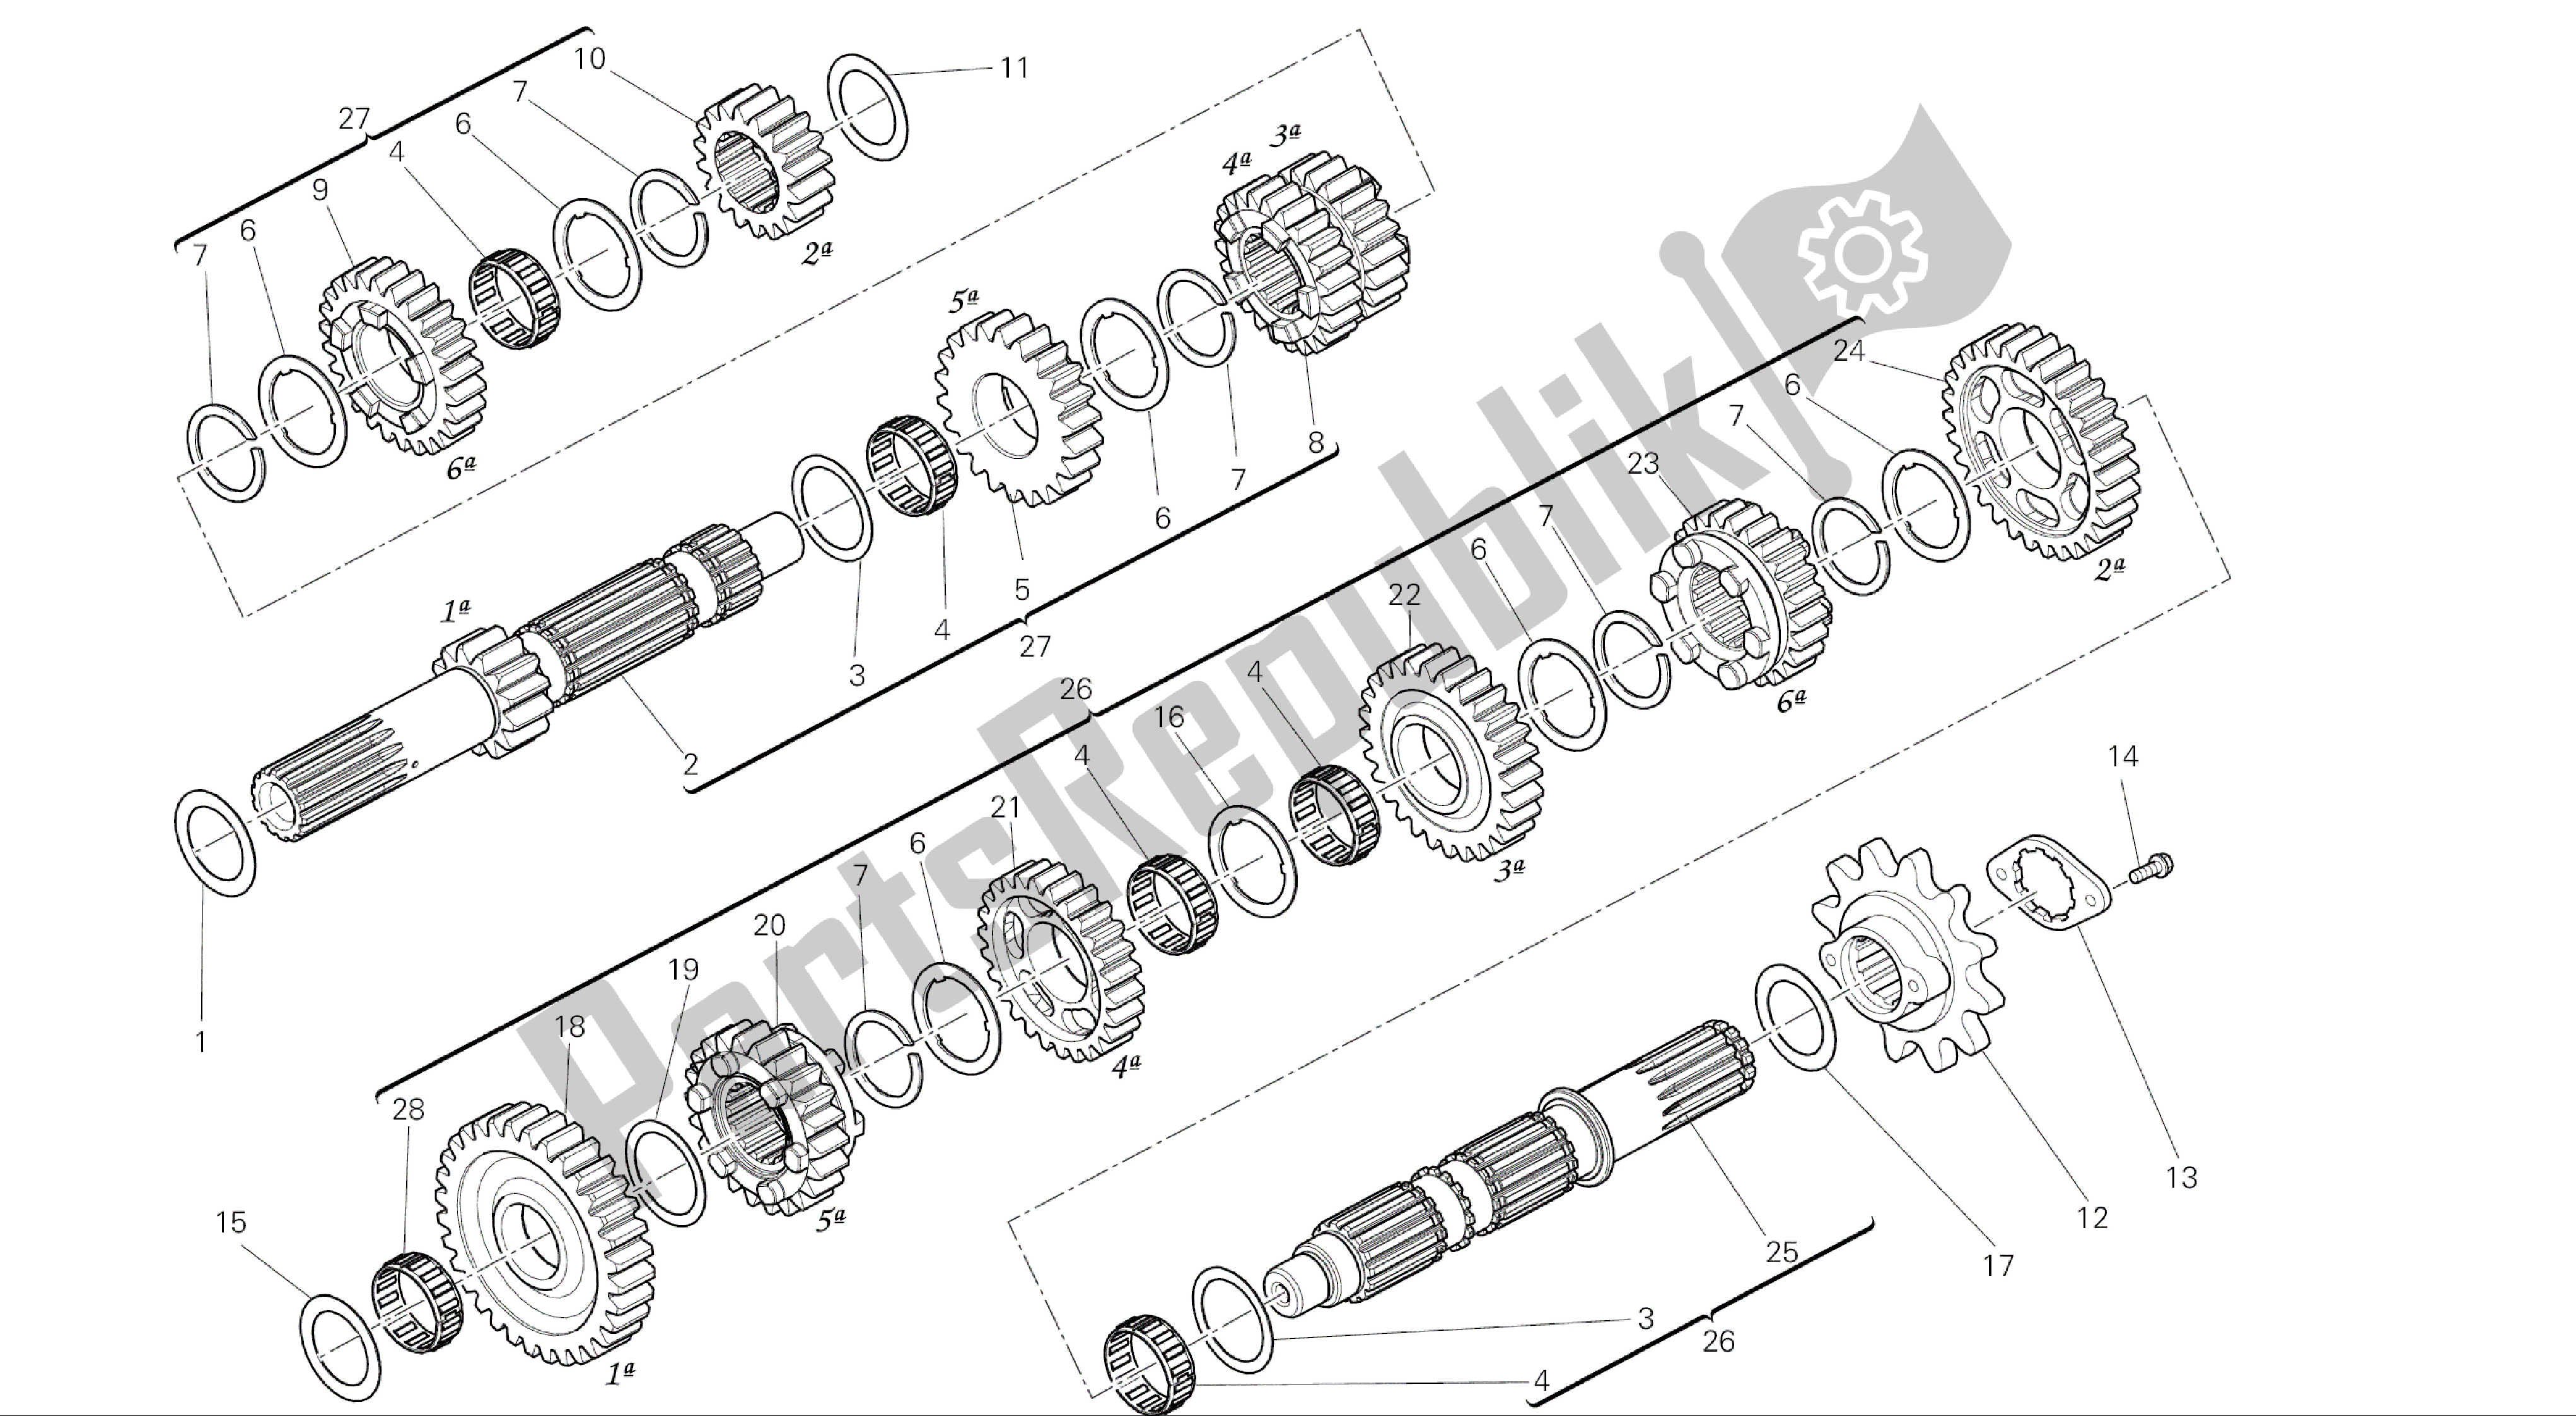 All parts for the Drawing 003 - Gear Box [mod:m696 Abs,m696+abs;xst:aus,eur,jap]group Engine of the Ducati Monster ABS 696 2014